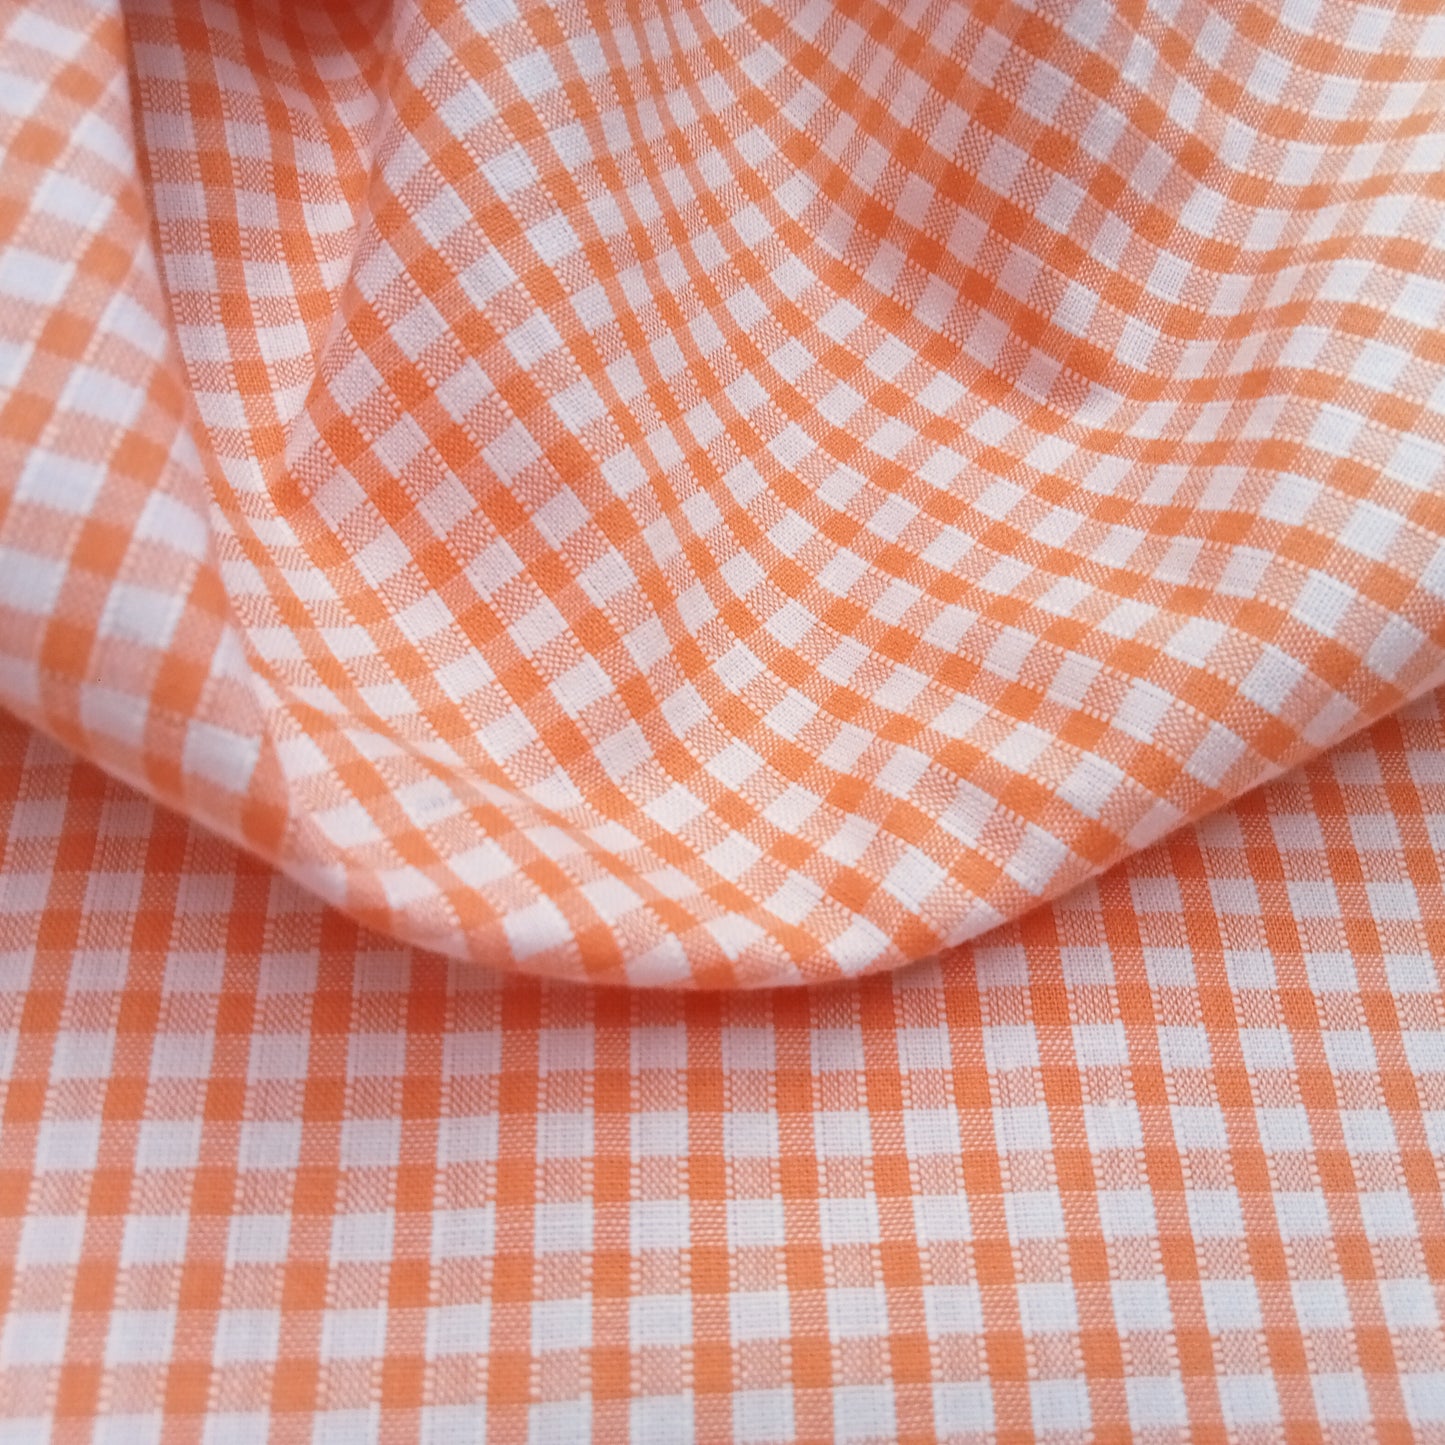 Cotton gingham -1/8" - sold by 1/2mtr